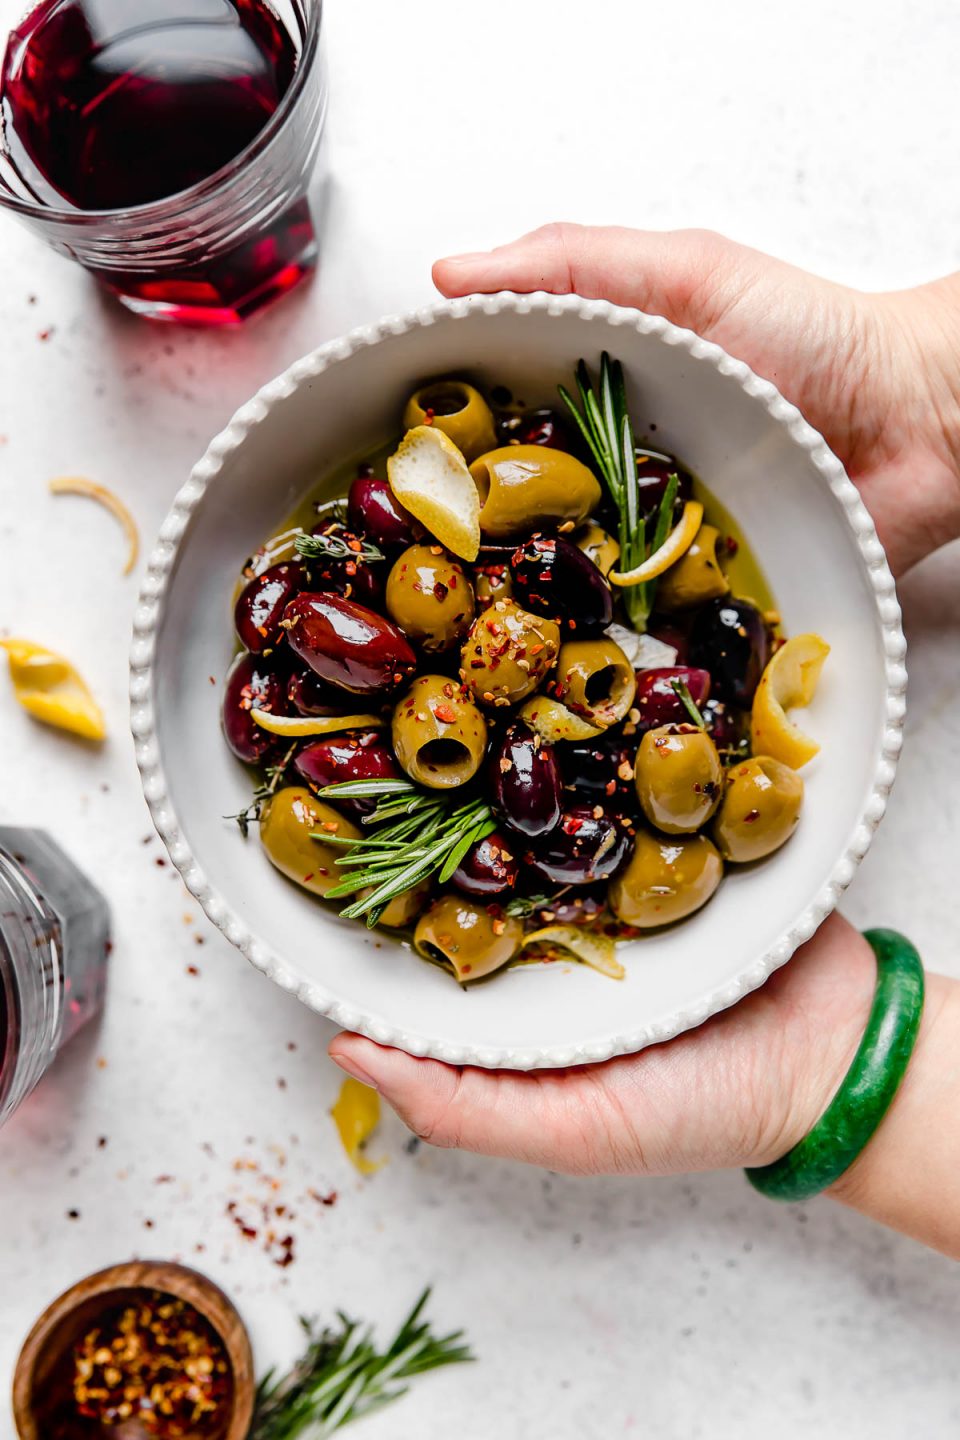 Homemade marinated olives served in a white dish with scalloped edges. The bowl is atop a white surface, surrounded by fresh rosemary, lemon peel, a small wooden bowl with red chili flakes, & a few glasses of red wine. A woman's hands are reaching into the photo, holding the bowl of olives.